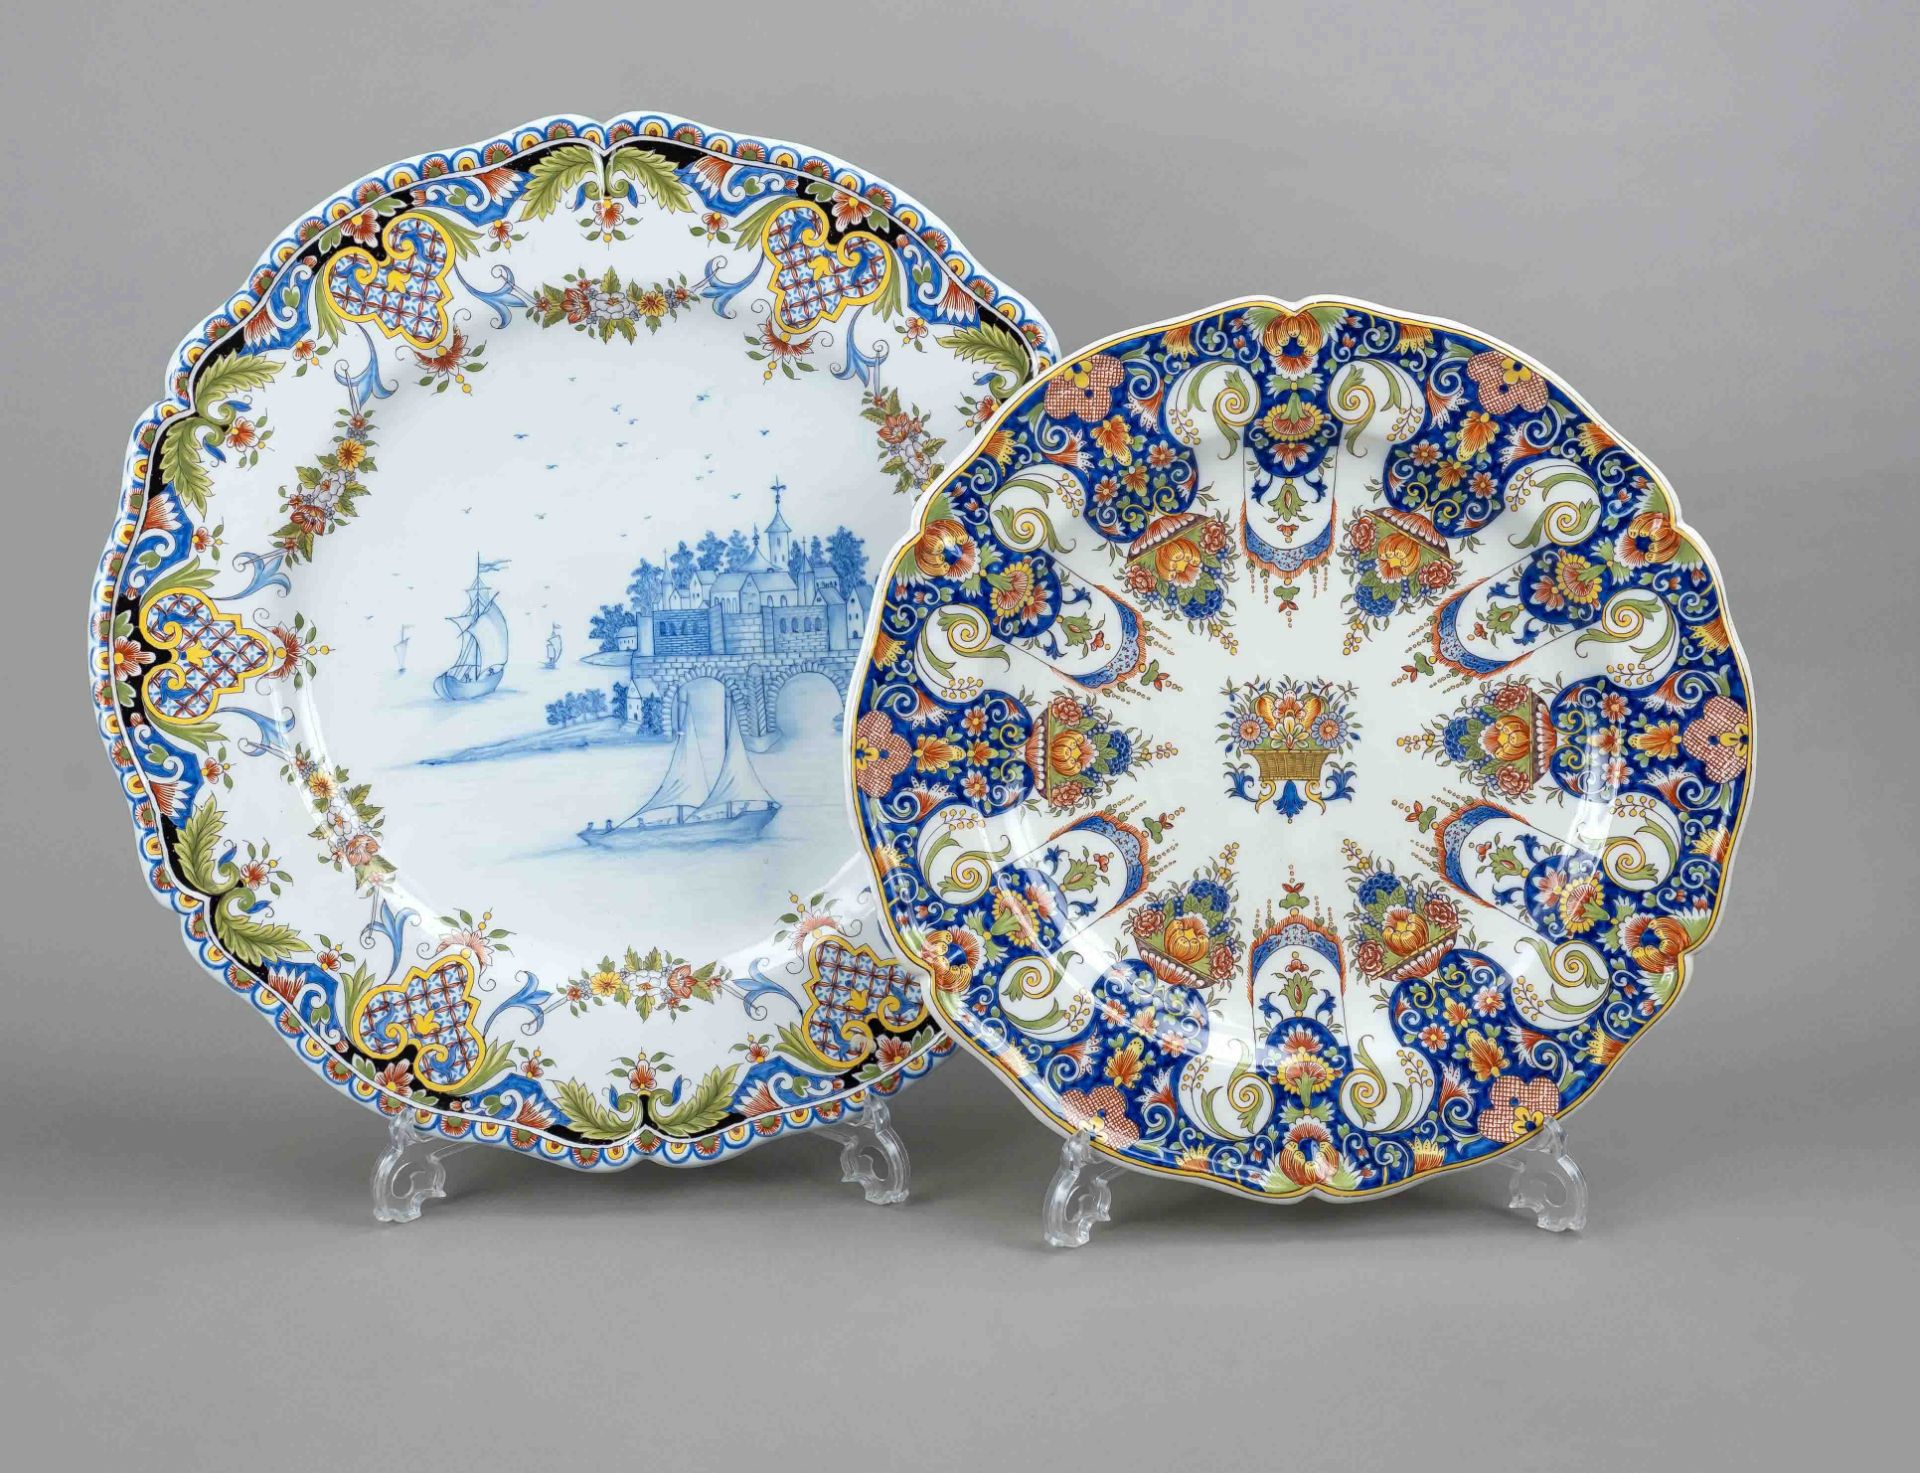 Two very large majolica plates, 21st century, in the style of old Italian ceramics, each with